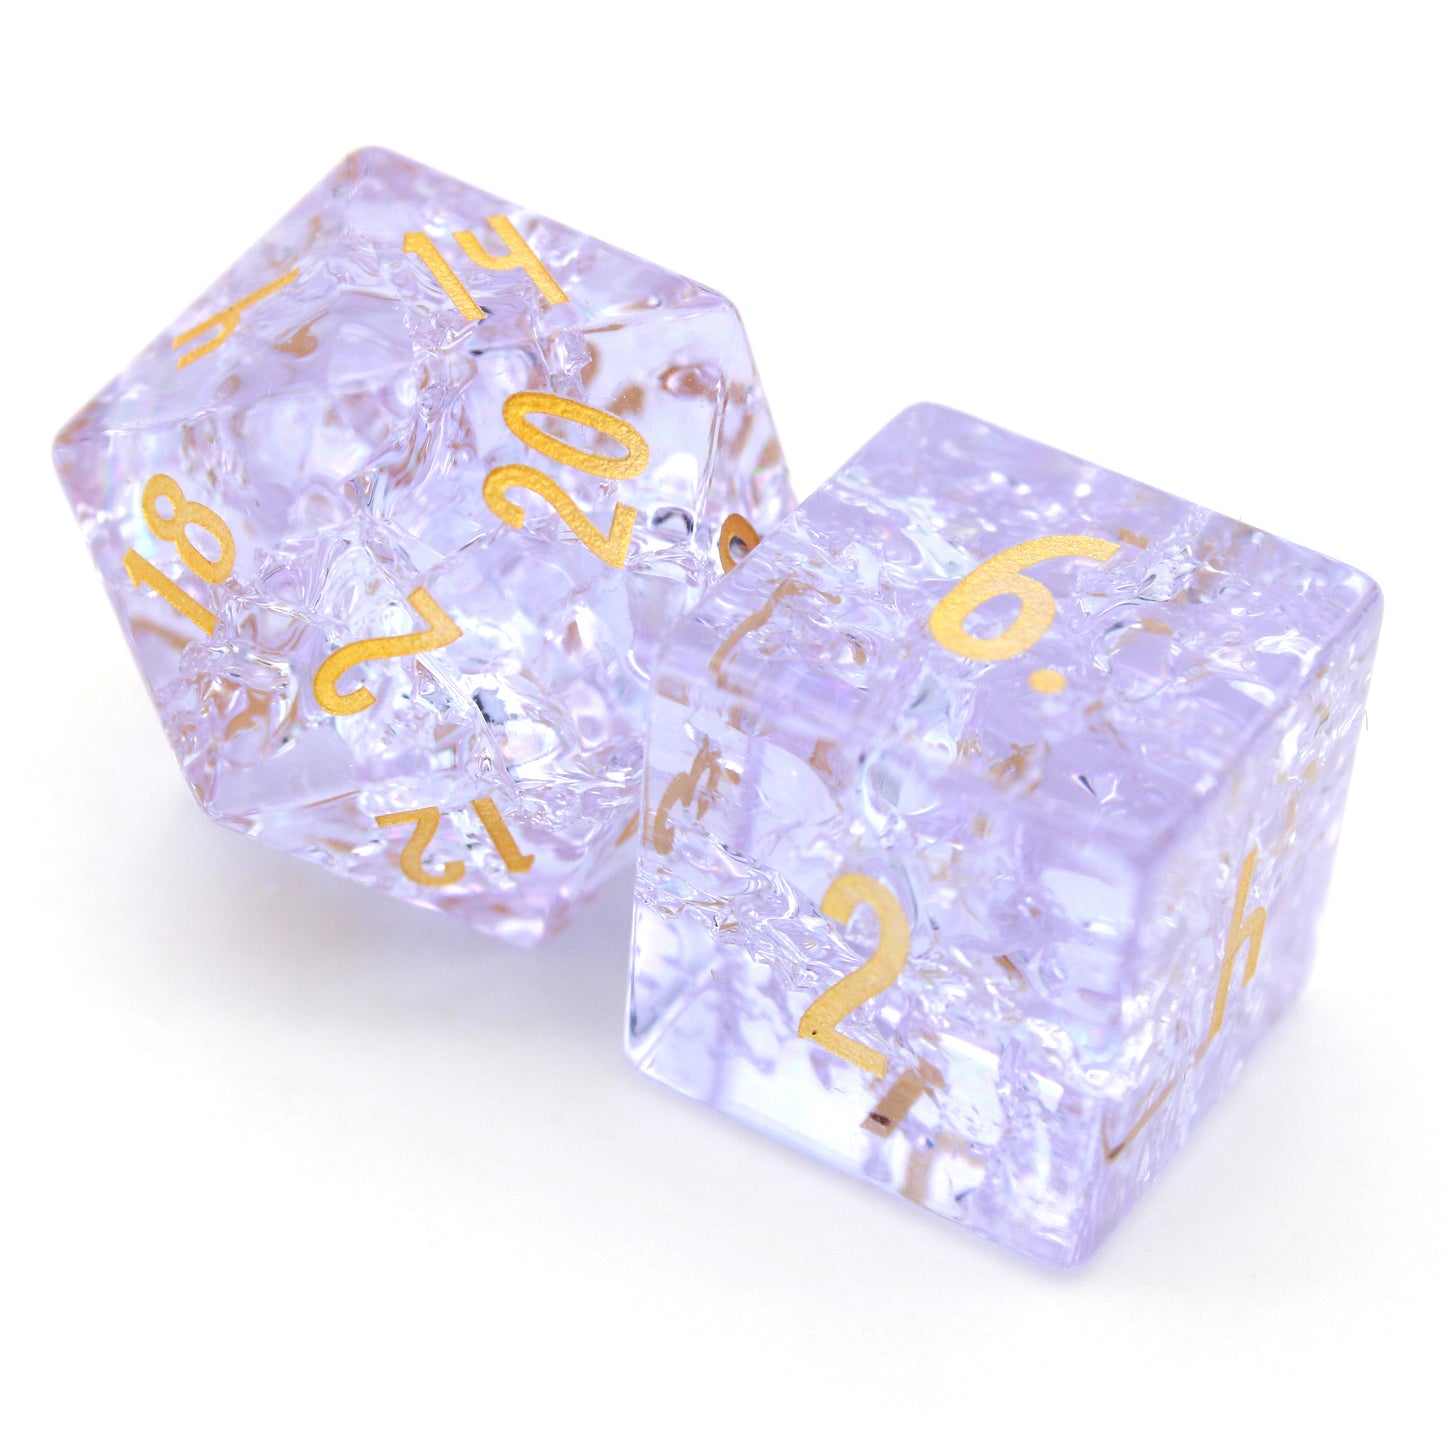 Summer Court is a 7-piece, light purple crystal set inked in gold.